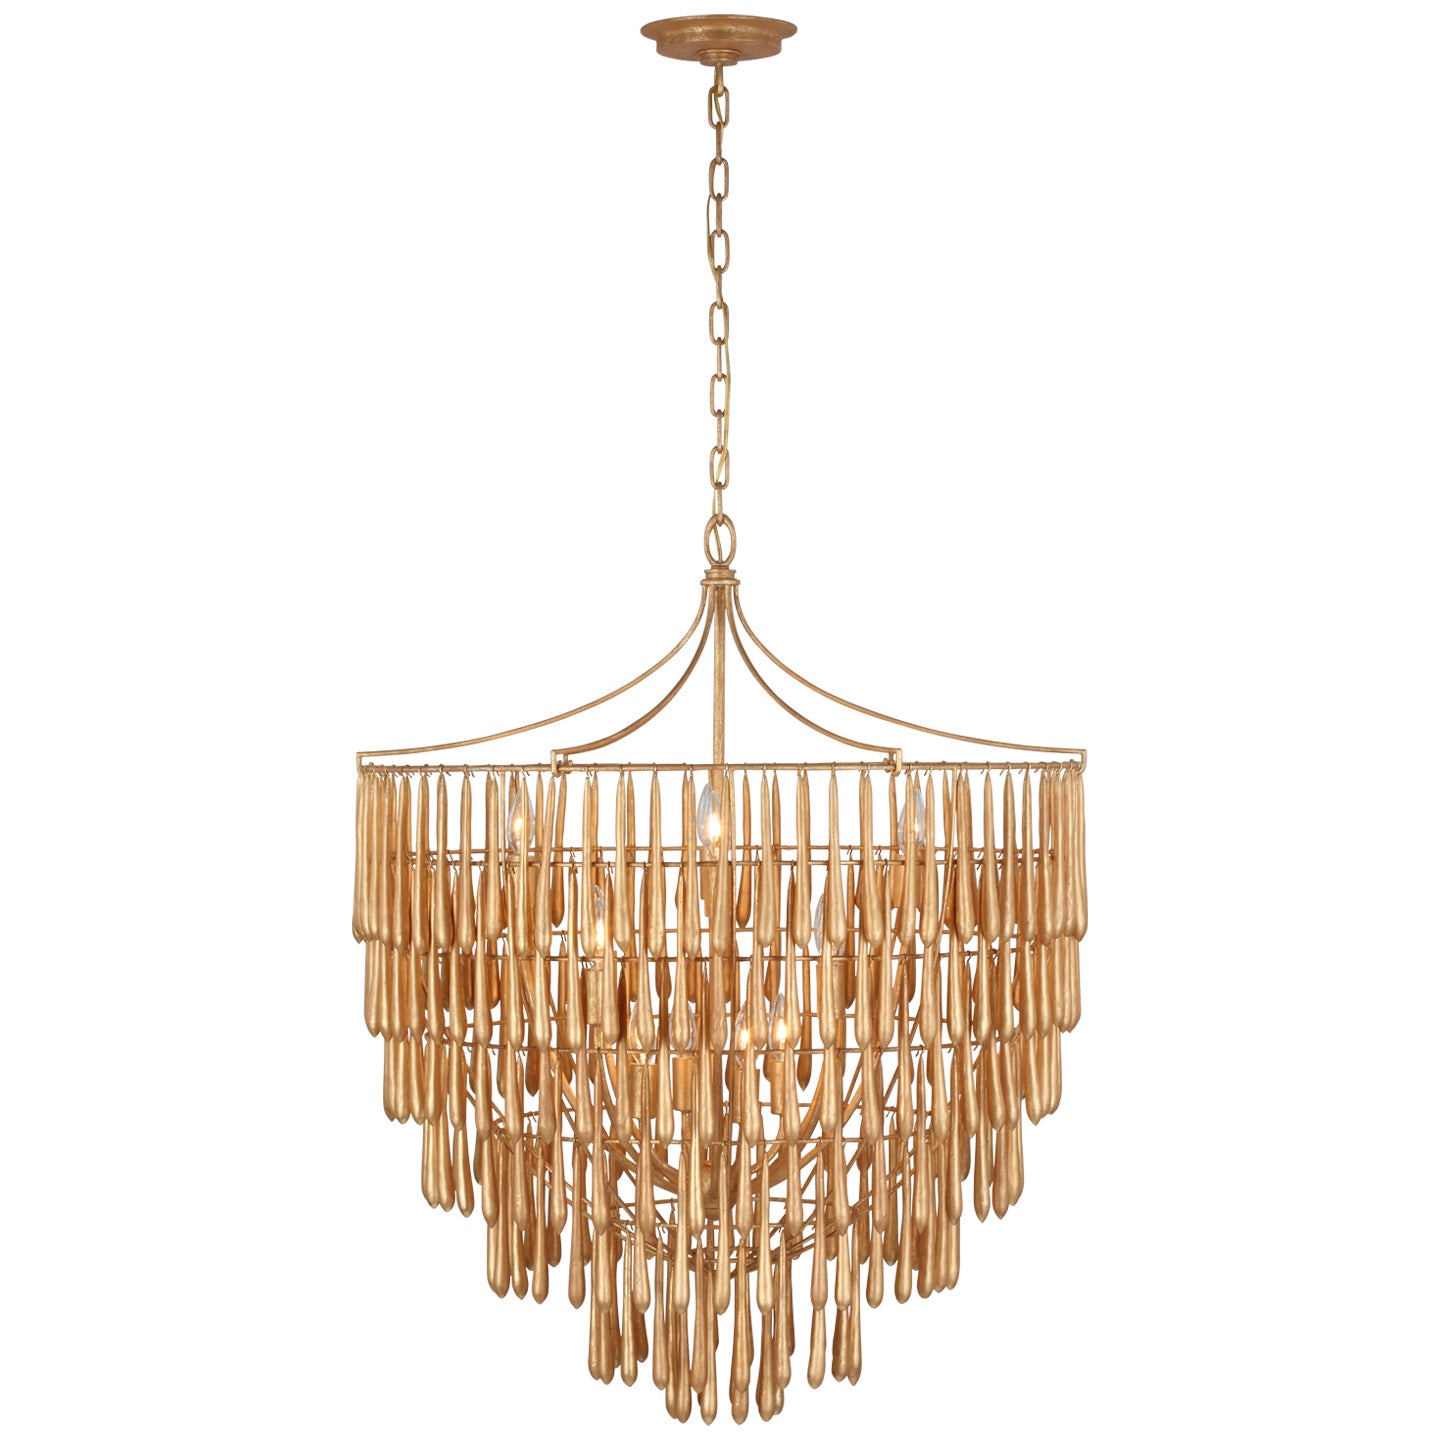 Load image into Gallery viewer, Visual Comfort Signature - JN 5132AGL - LED Chandelier - Vacarro - Antique Gold Leaf
